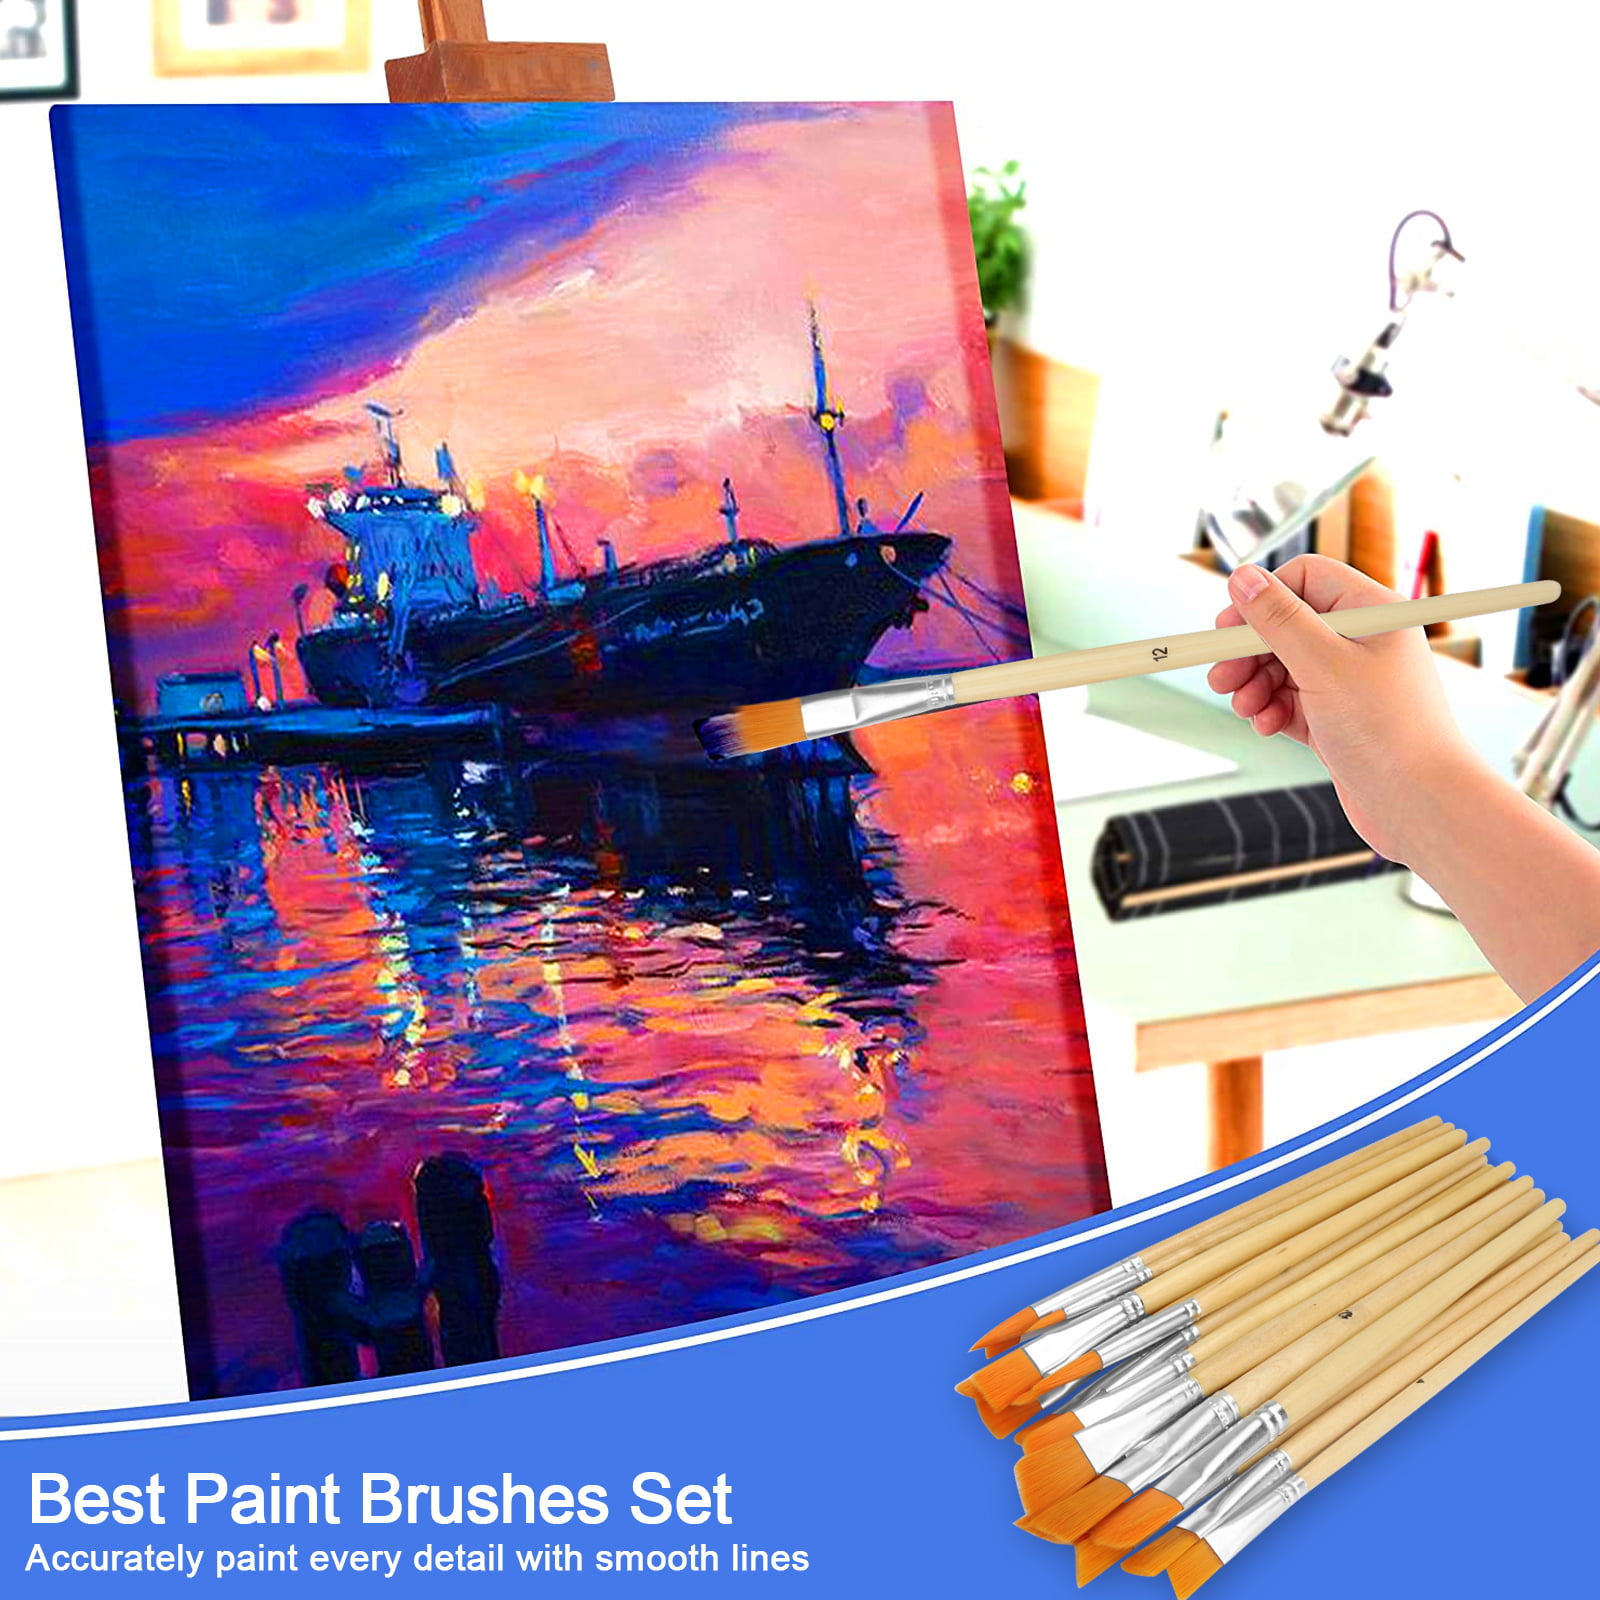 12 Best Acrylic Paint Brushes for Novice & Experienced Acrylic Painters